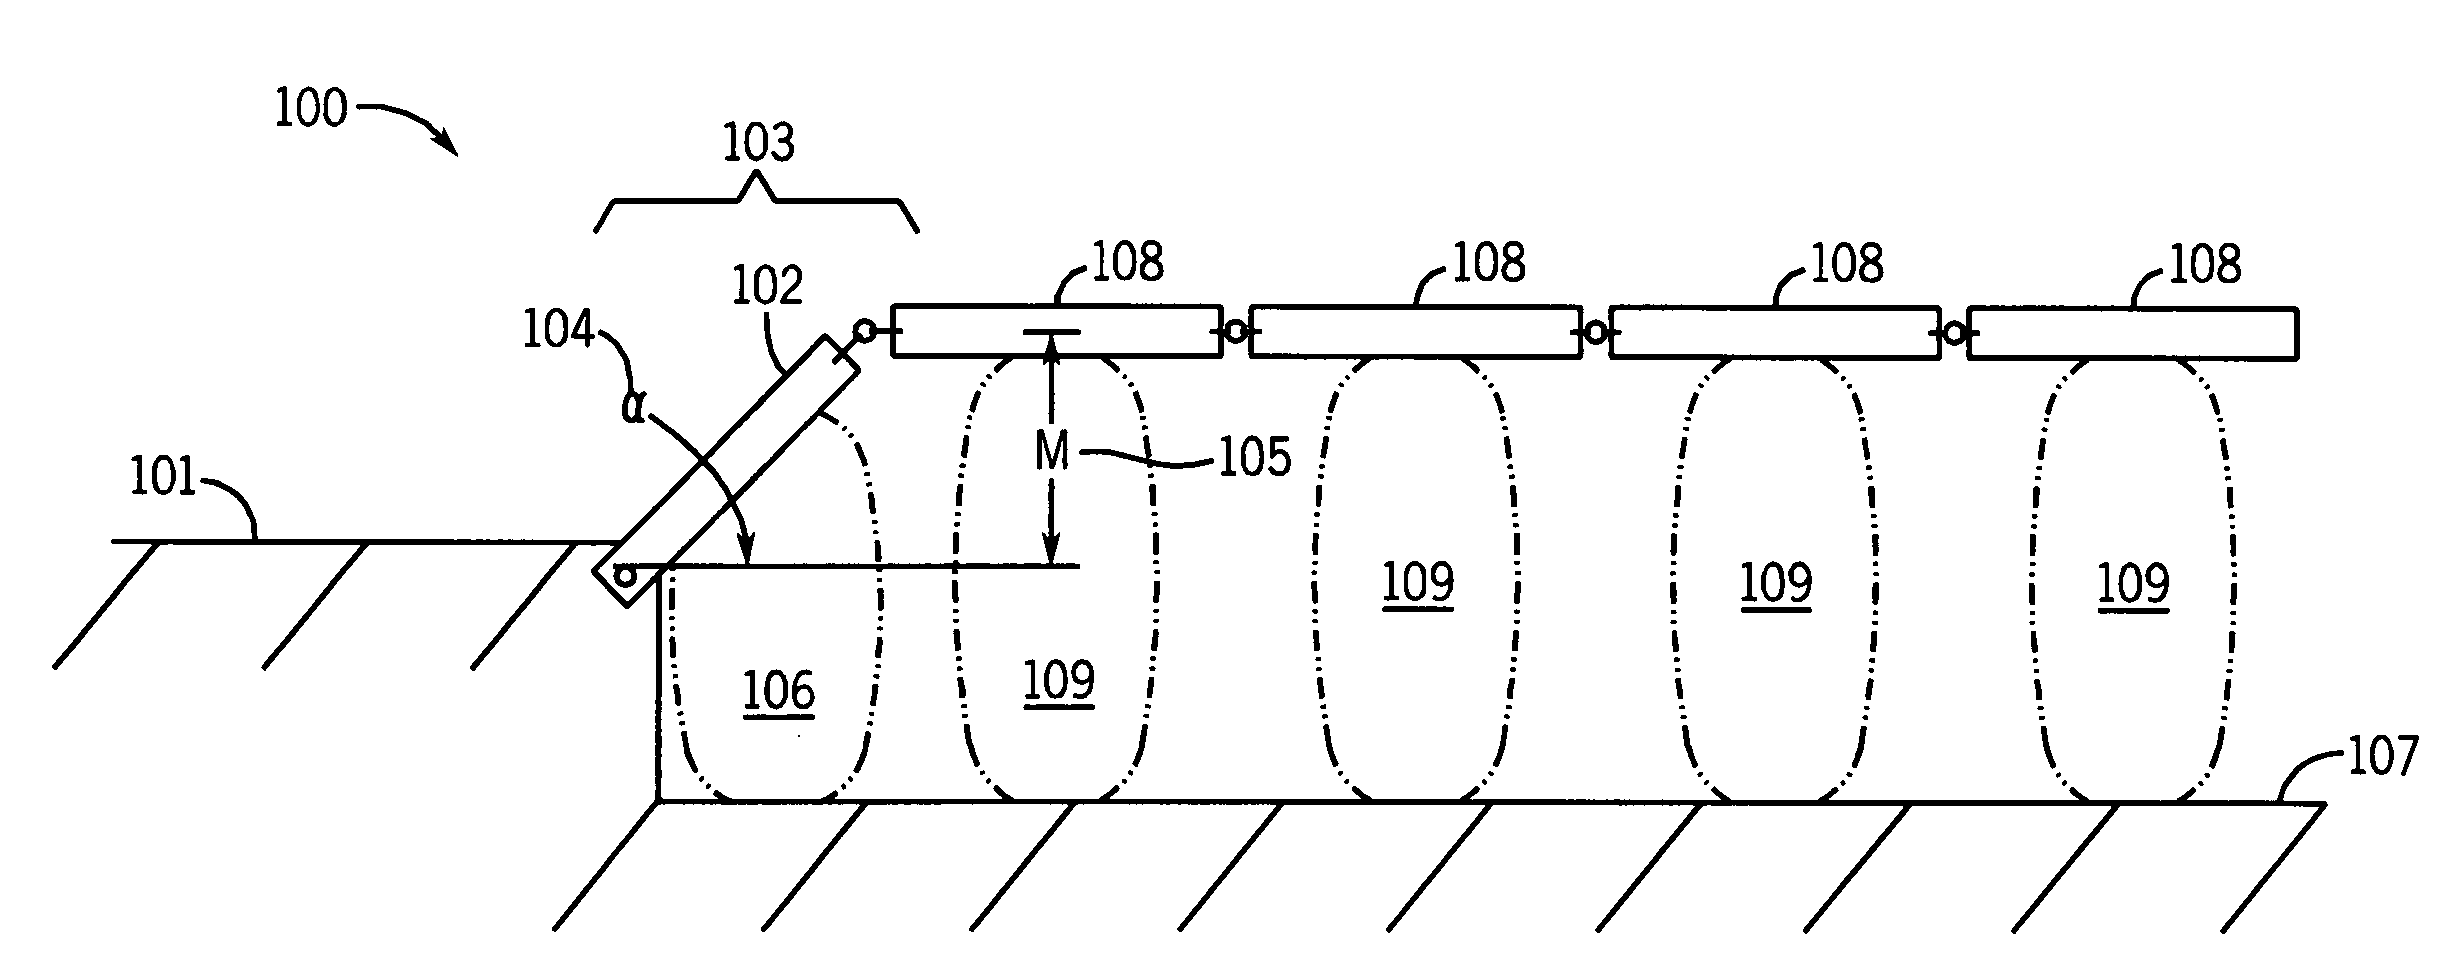 Roadway for decelerating and/or accelerating a vehicle including an aircraft